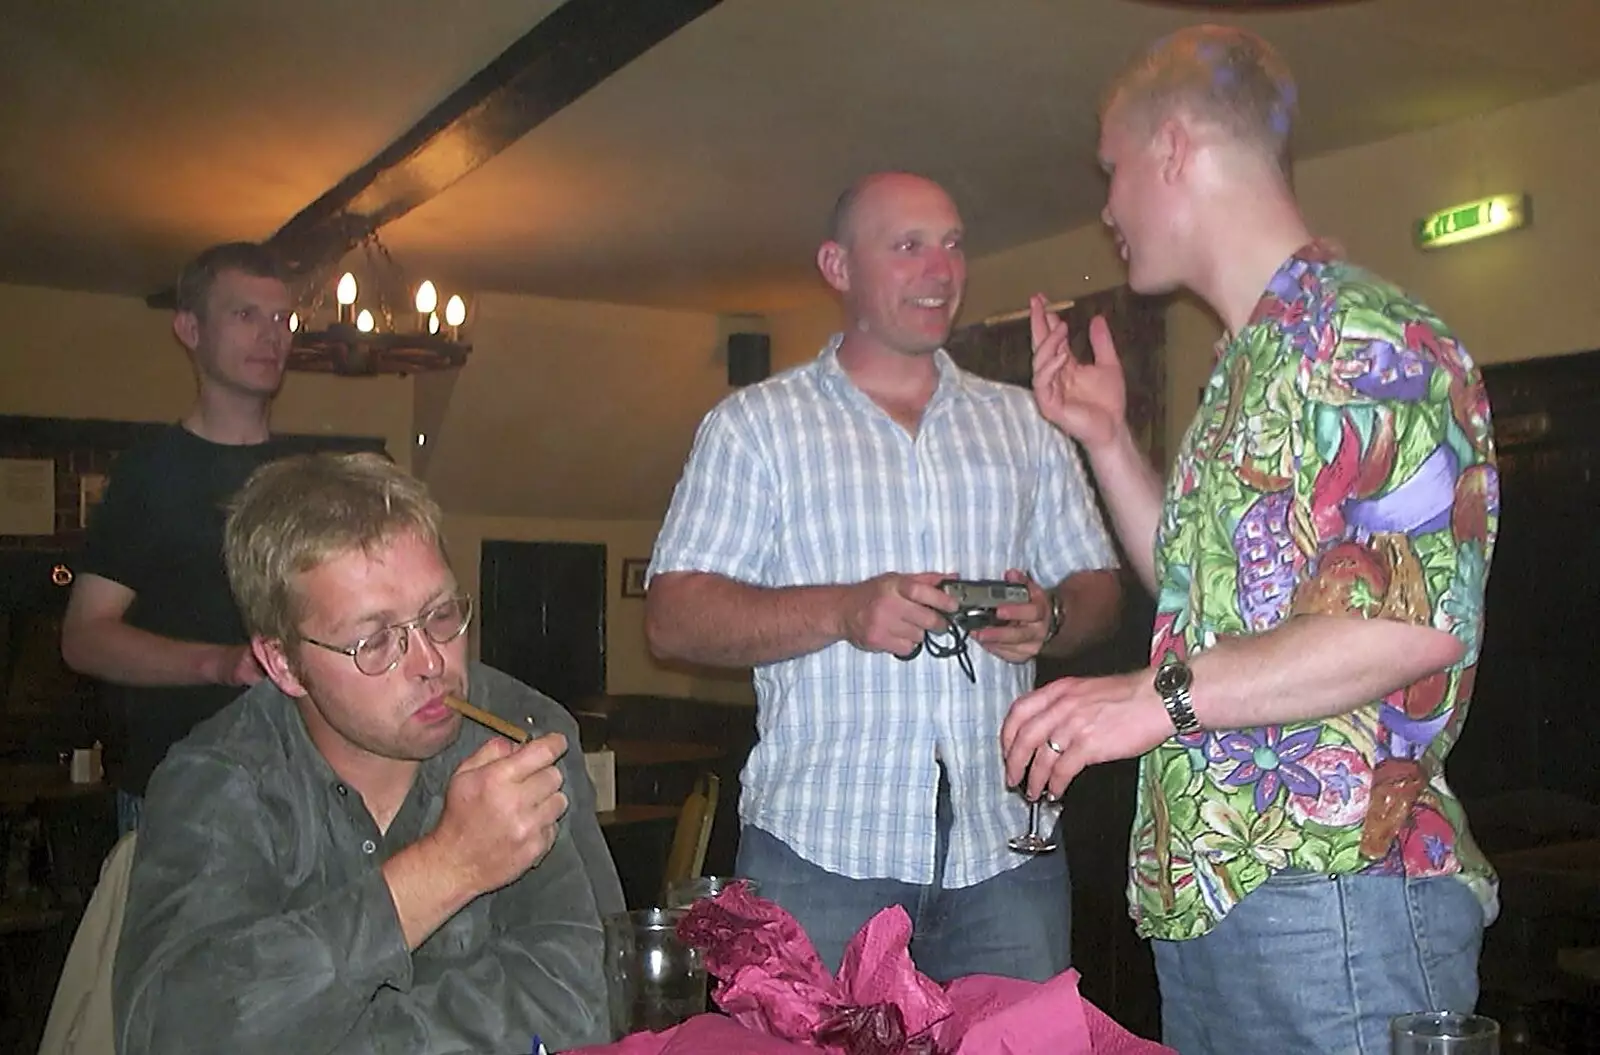 Marc and Mikey spark up some cigars, from Paul's Stag Night, Brome, Scole and Bressingham - Friday 20th August 2004